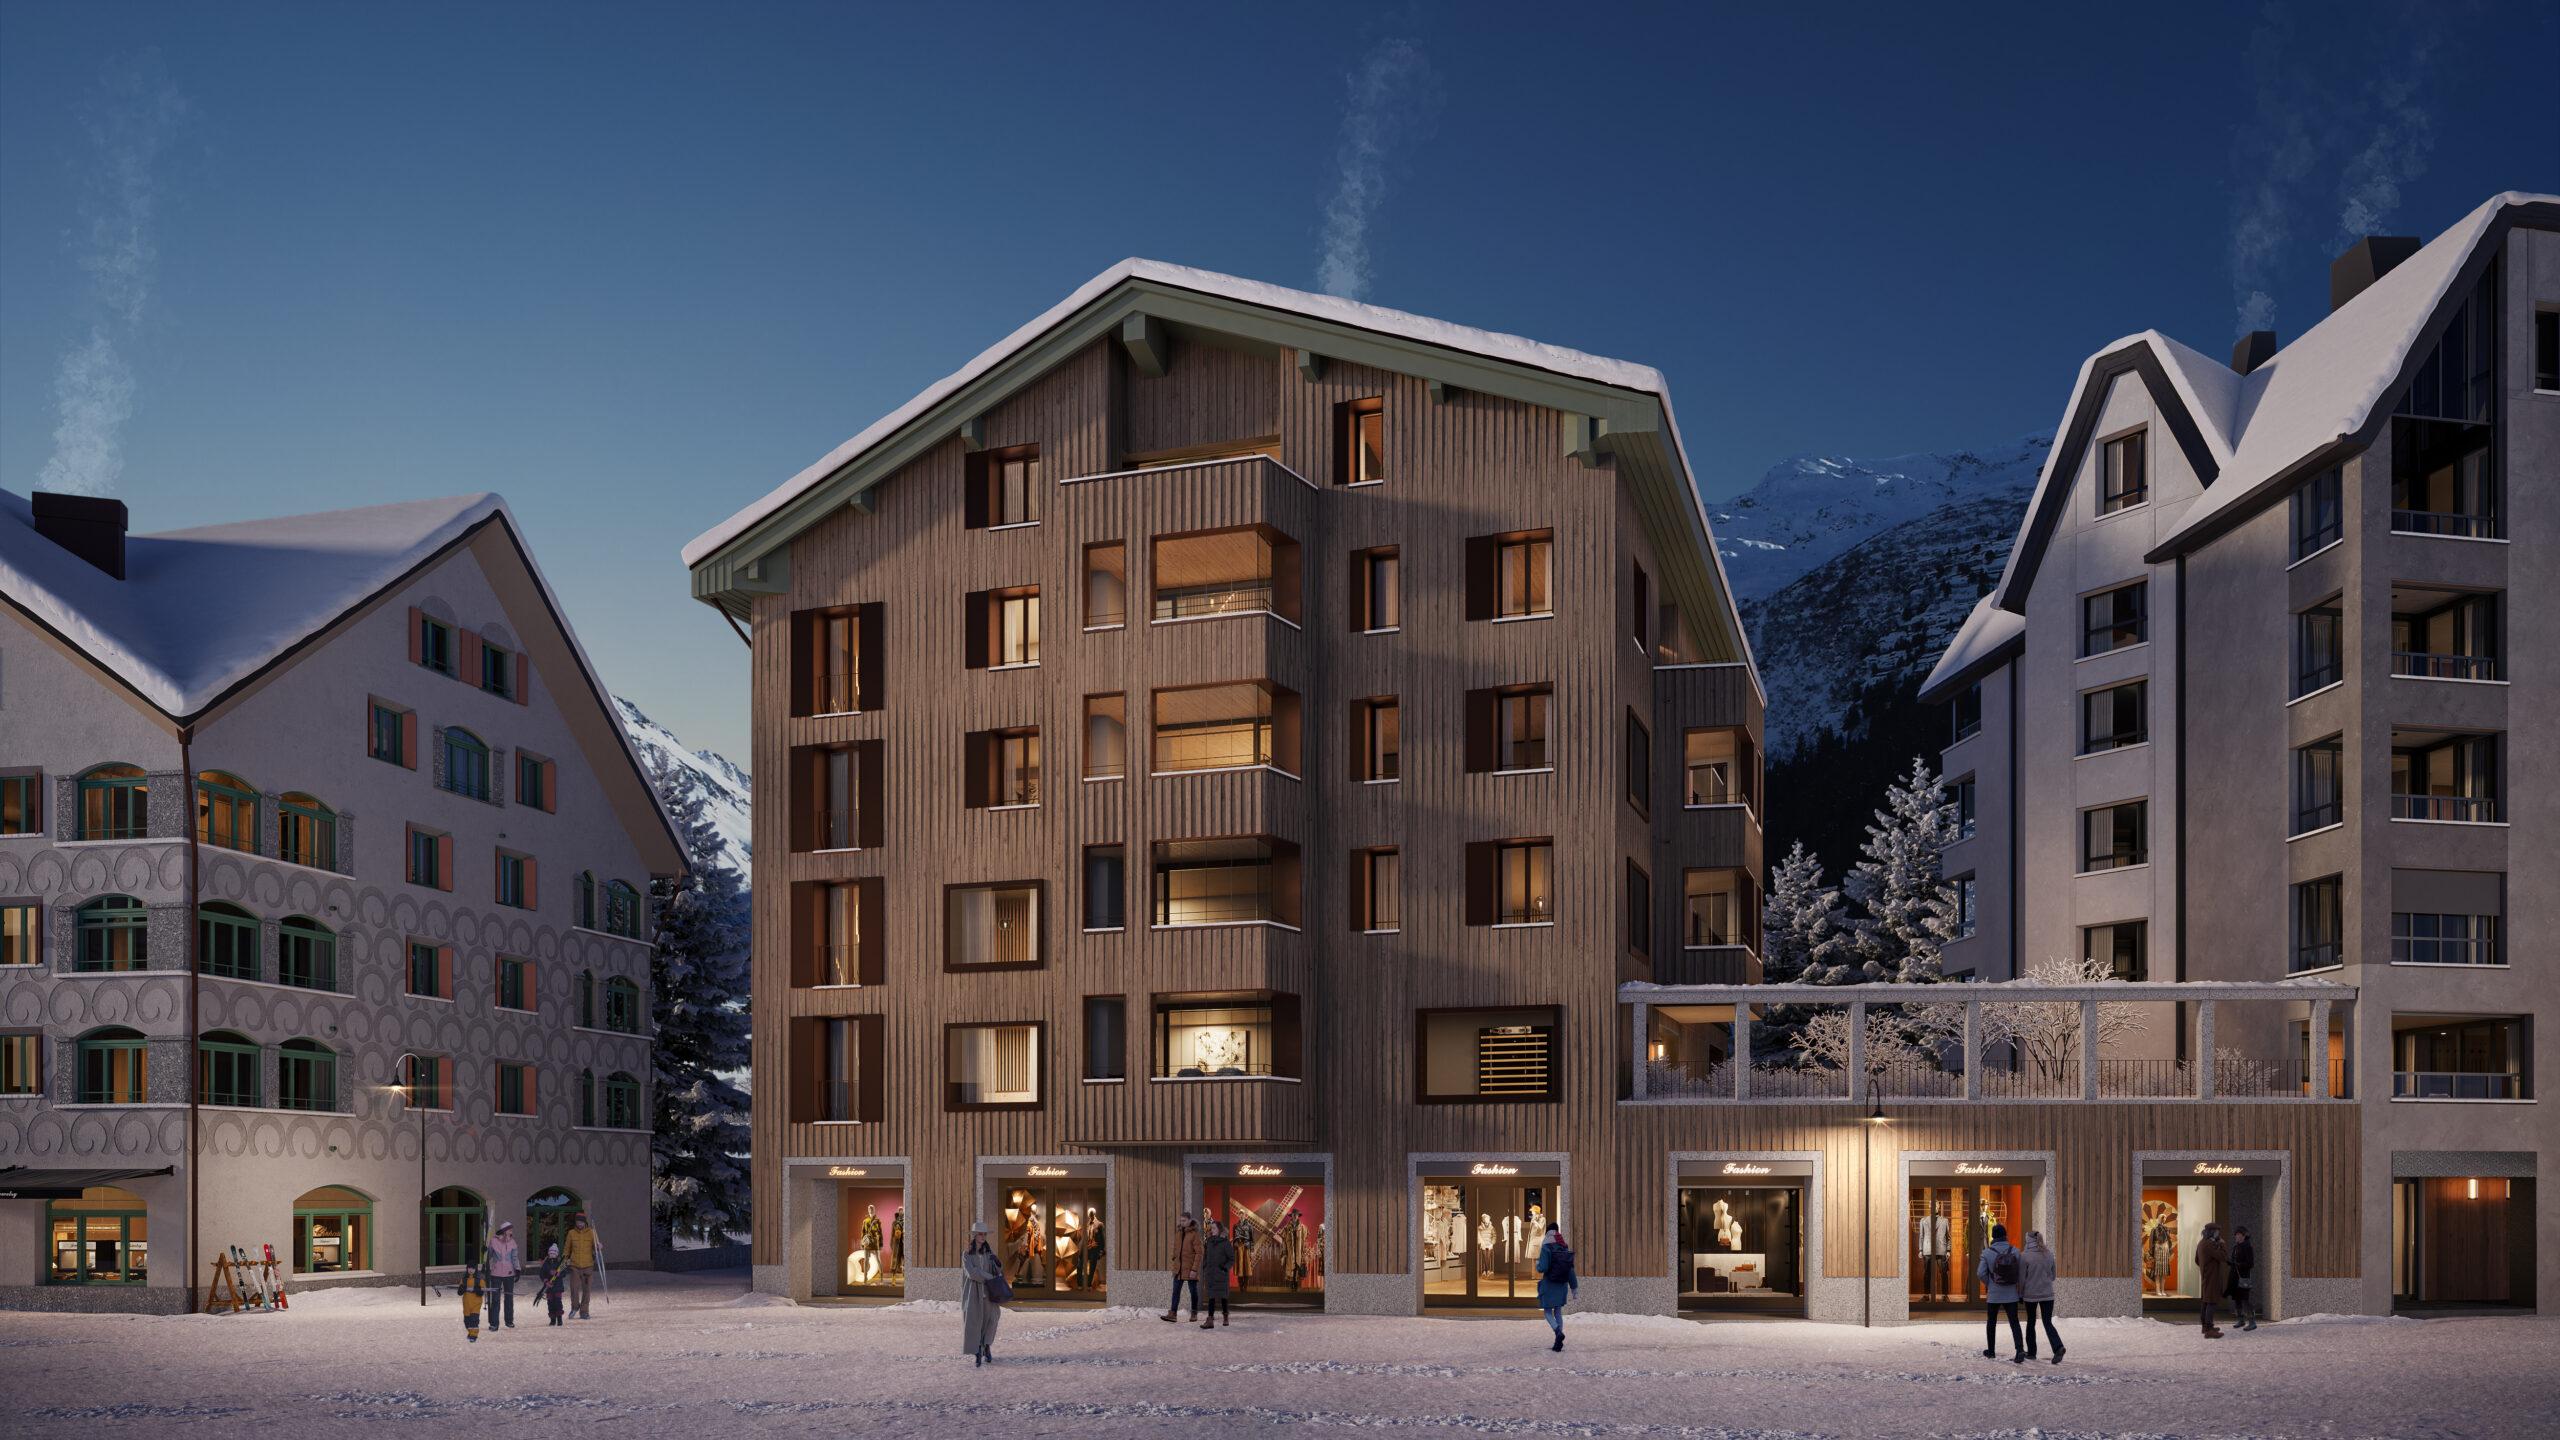 ANDERMATT SWISS ALPS OFFERS BUYERS IN ASIA AN EXCLUSIVE FIRST LOOK AT THE LATEST LUXURY ALPINE PROPERTY, VERA